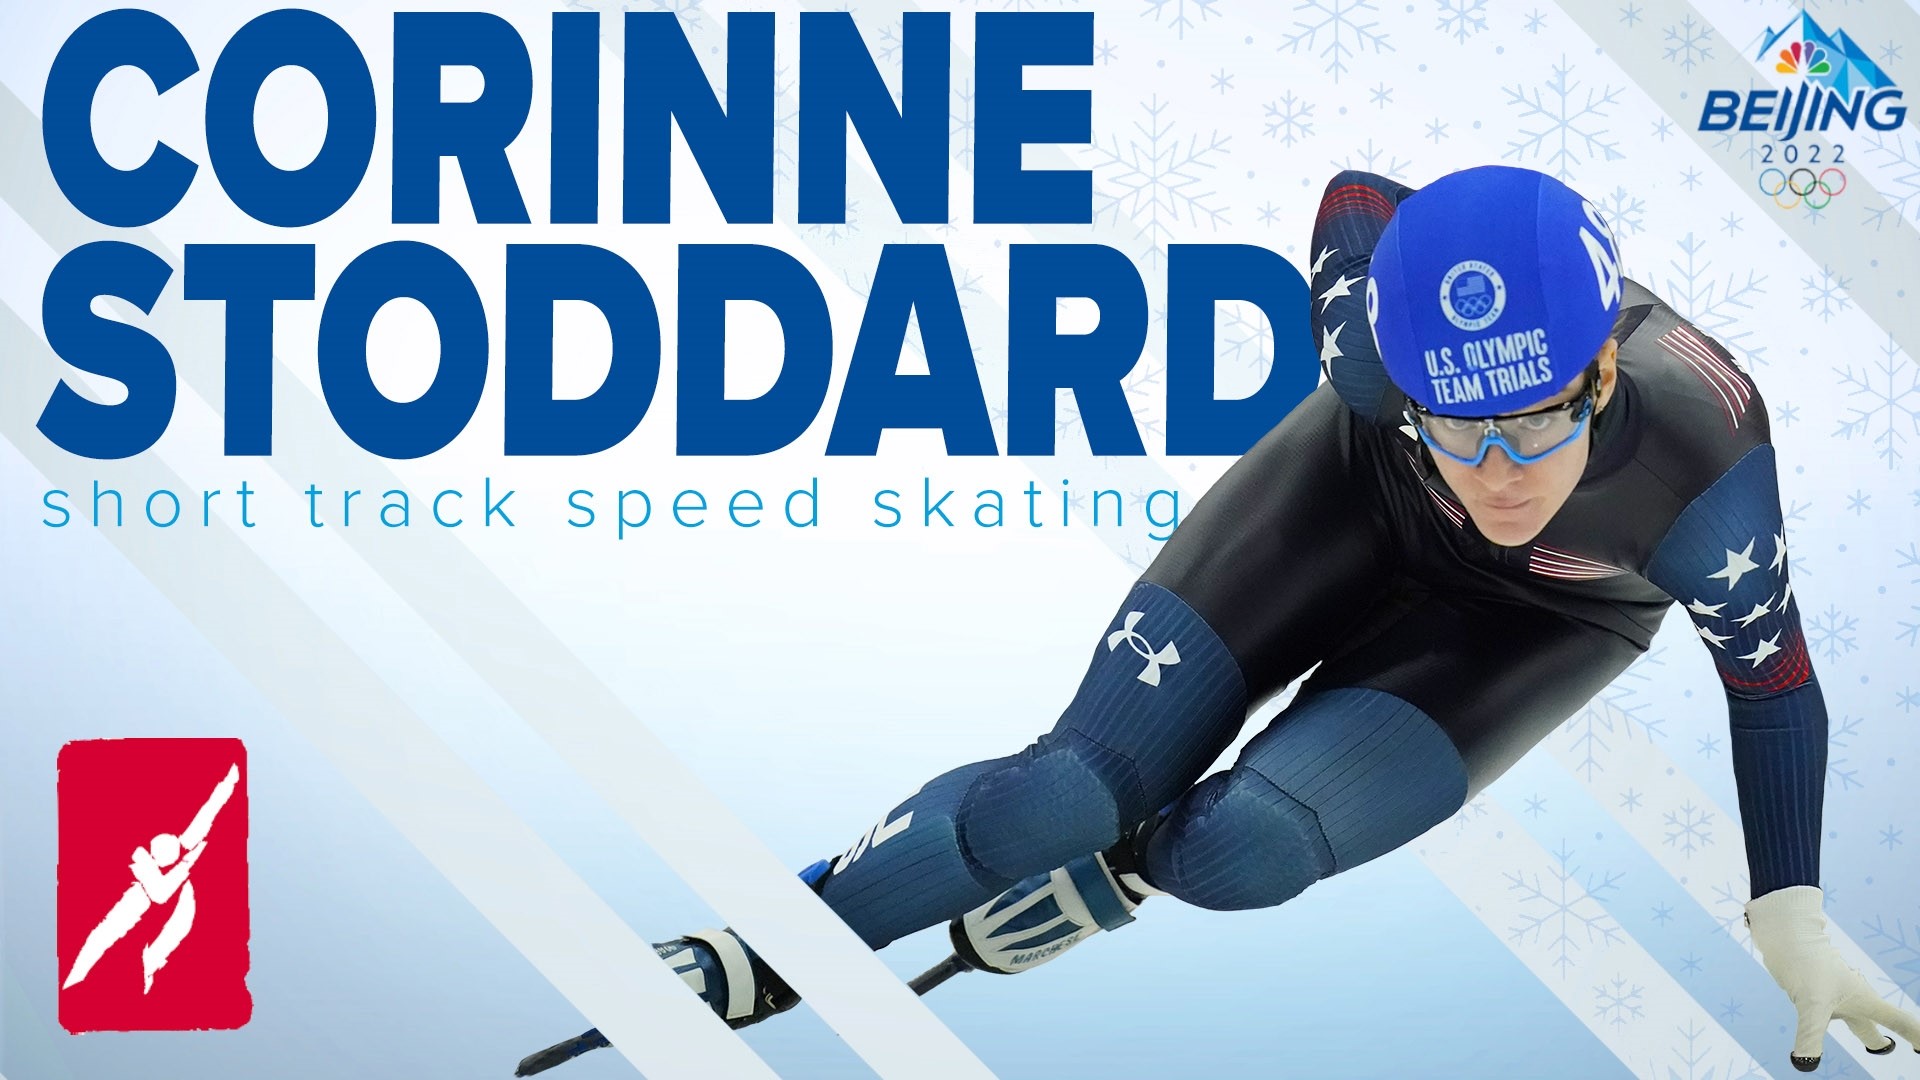 Corinne Stoddard started skating when she was 6 years old. Now she’s ready to give it her all at the 2022 Winter Olympics.